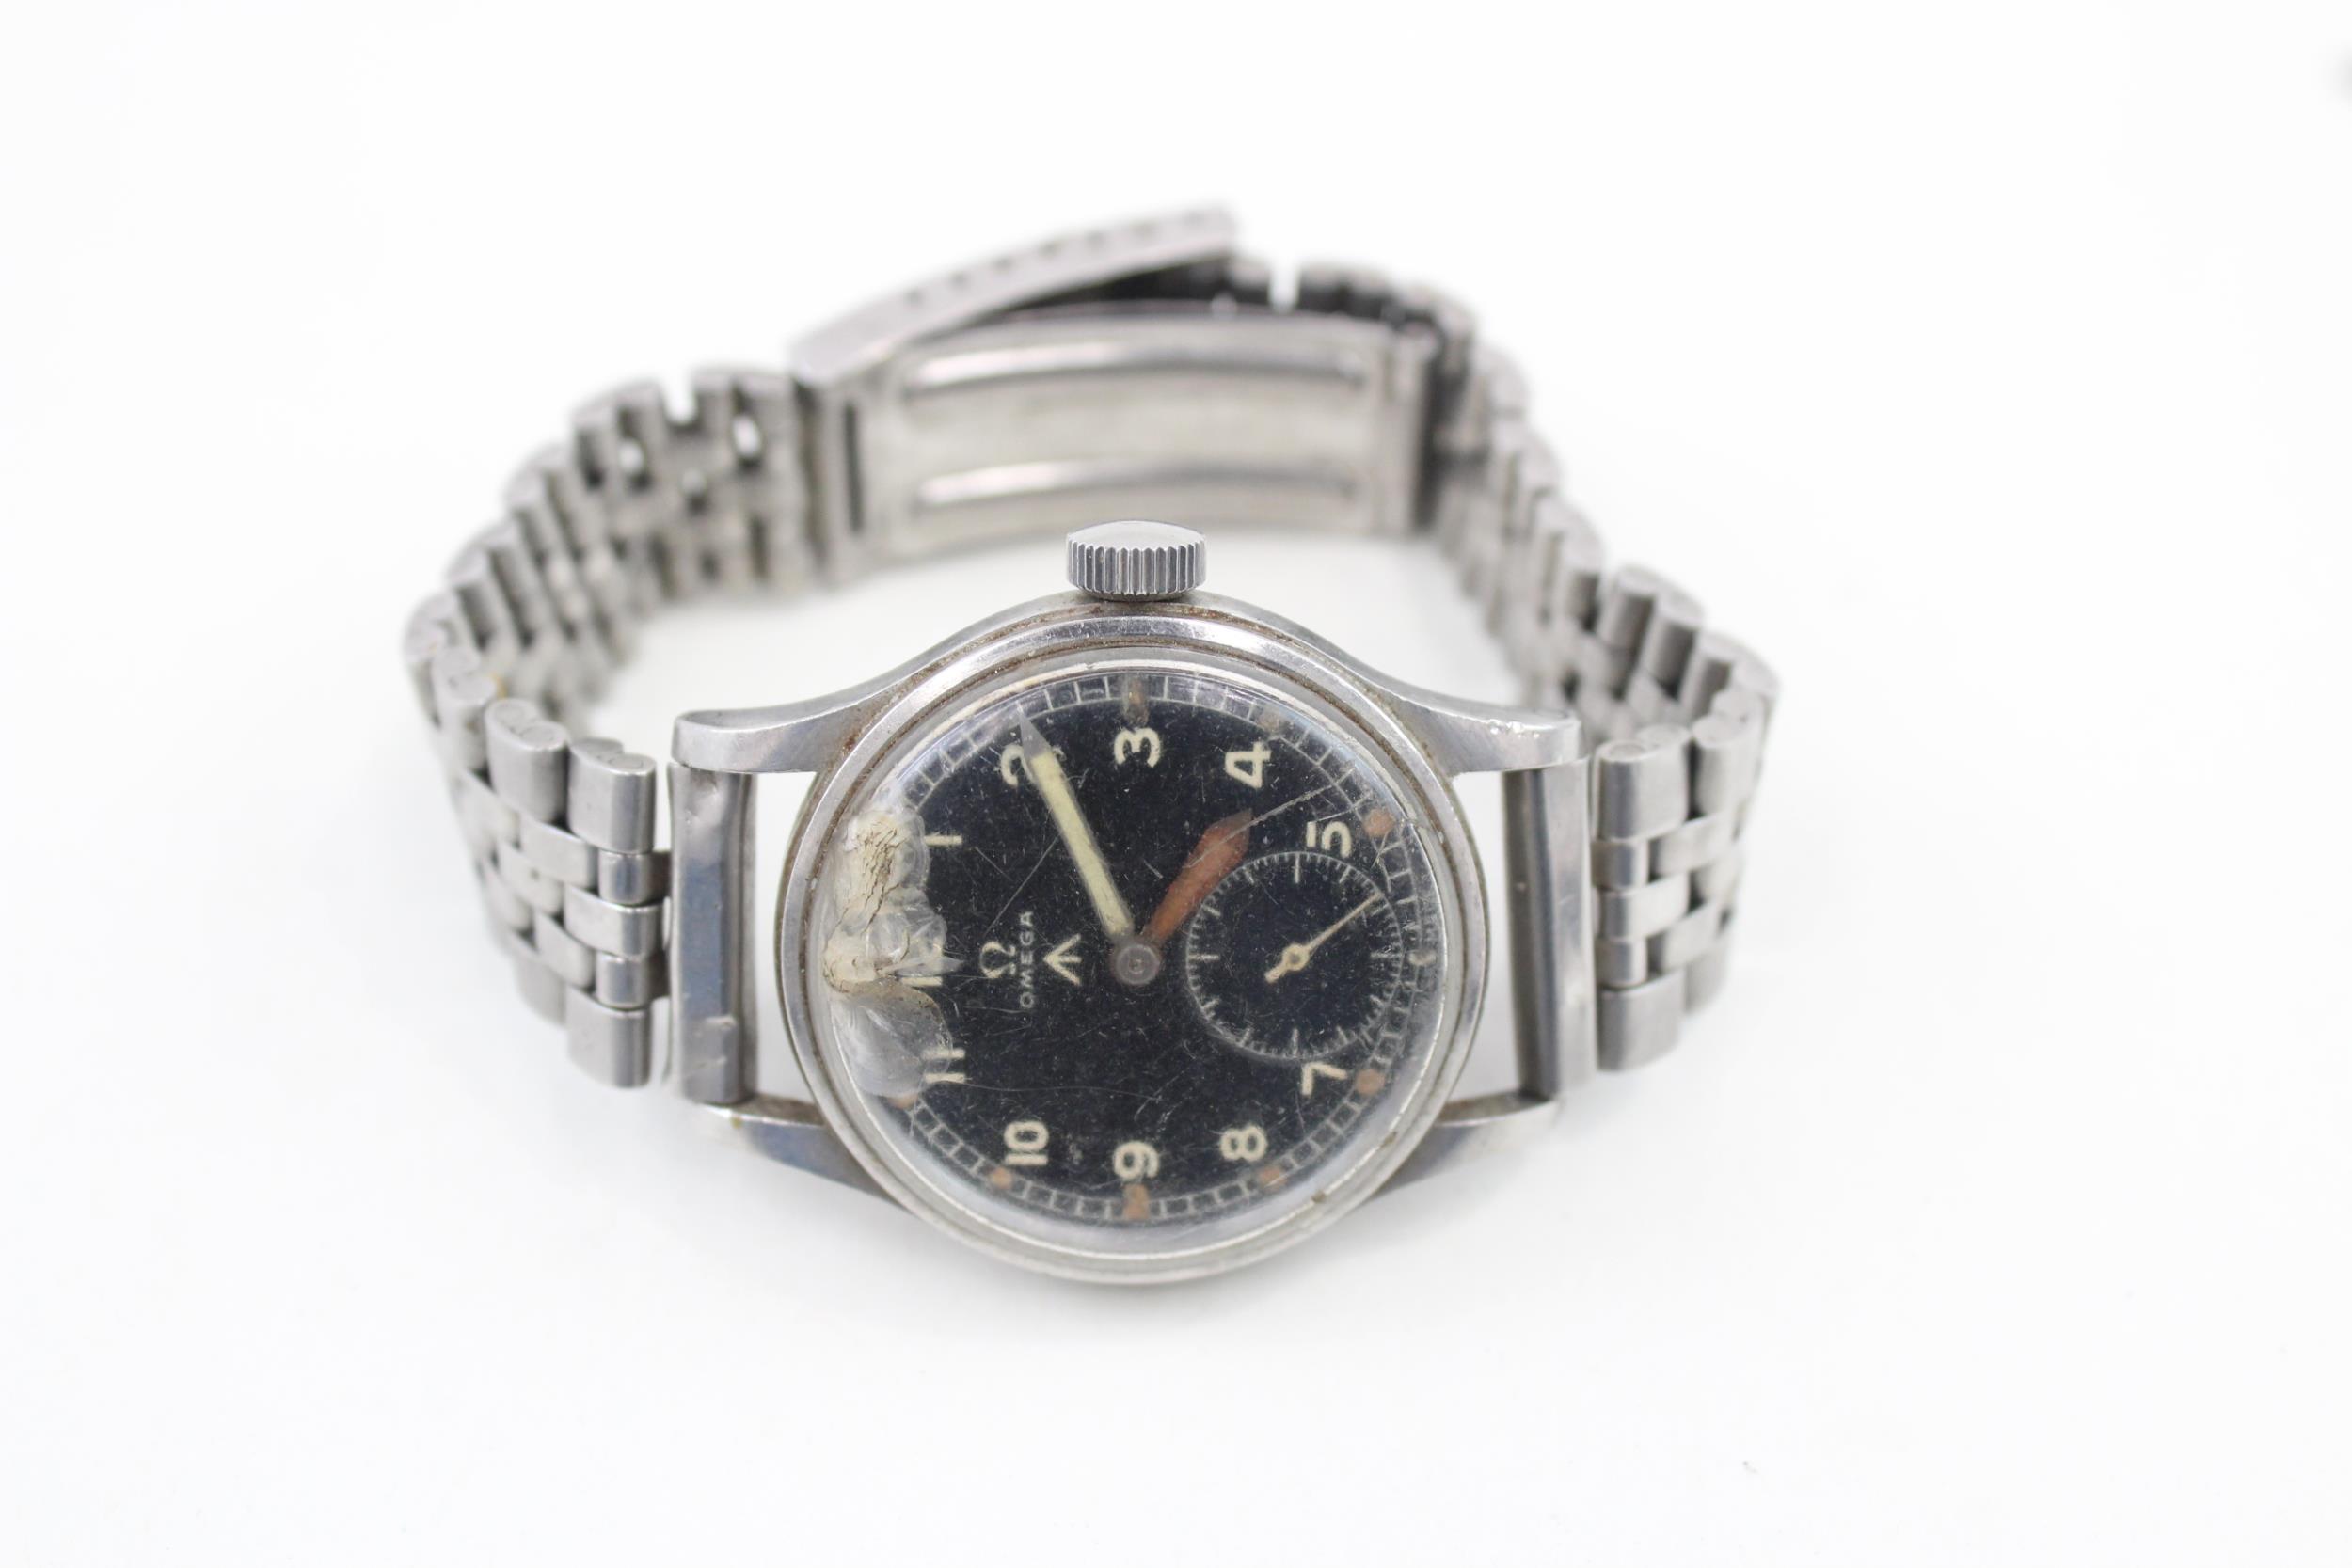 Omega 'Dirty Dozen' Military Issued WRISTWATCH Hand-Wind Requires Repair - Omega 'Dirty Dozen' - Image 2 of 6